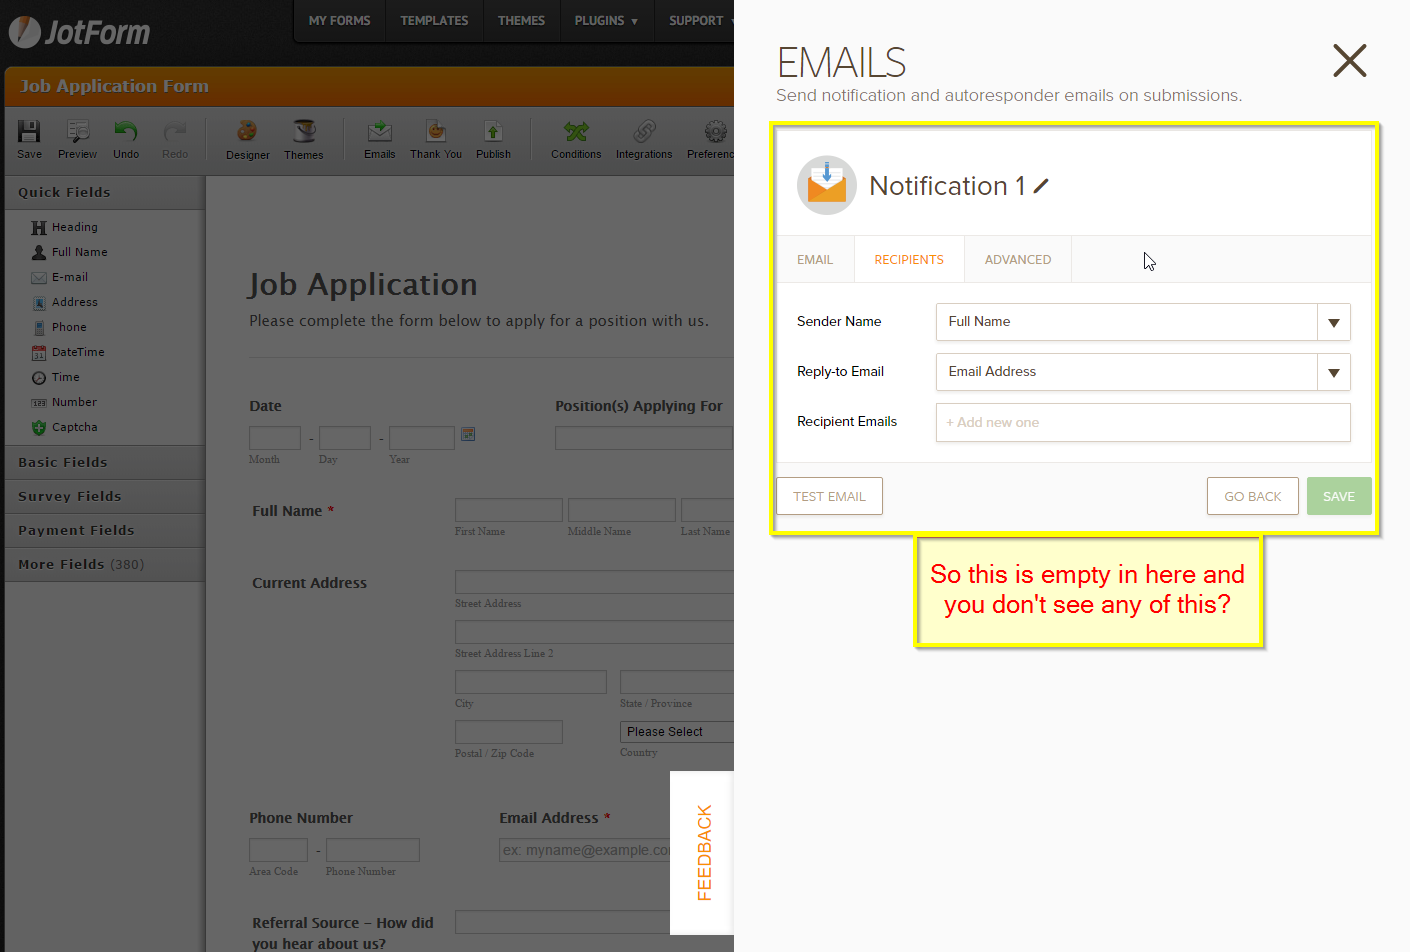 How can I change who receives the form after it has been submitted? Image 1 Screenshot 20